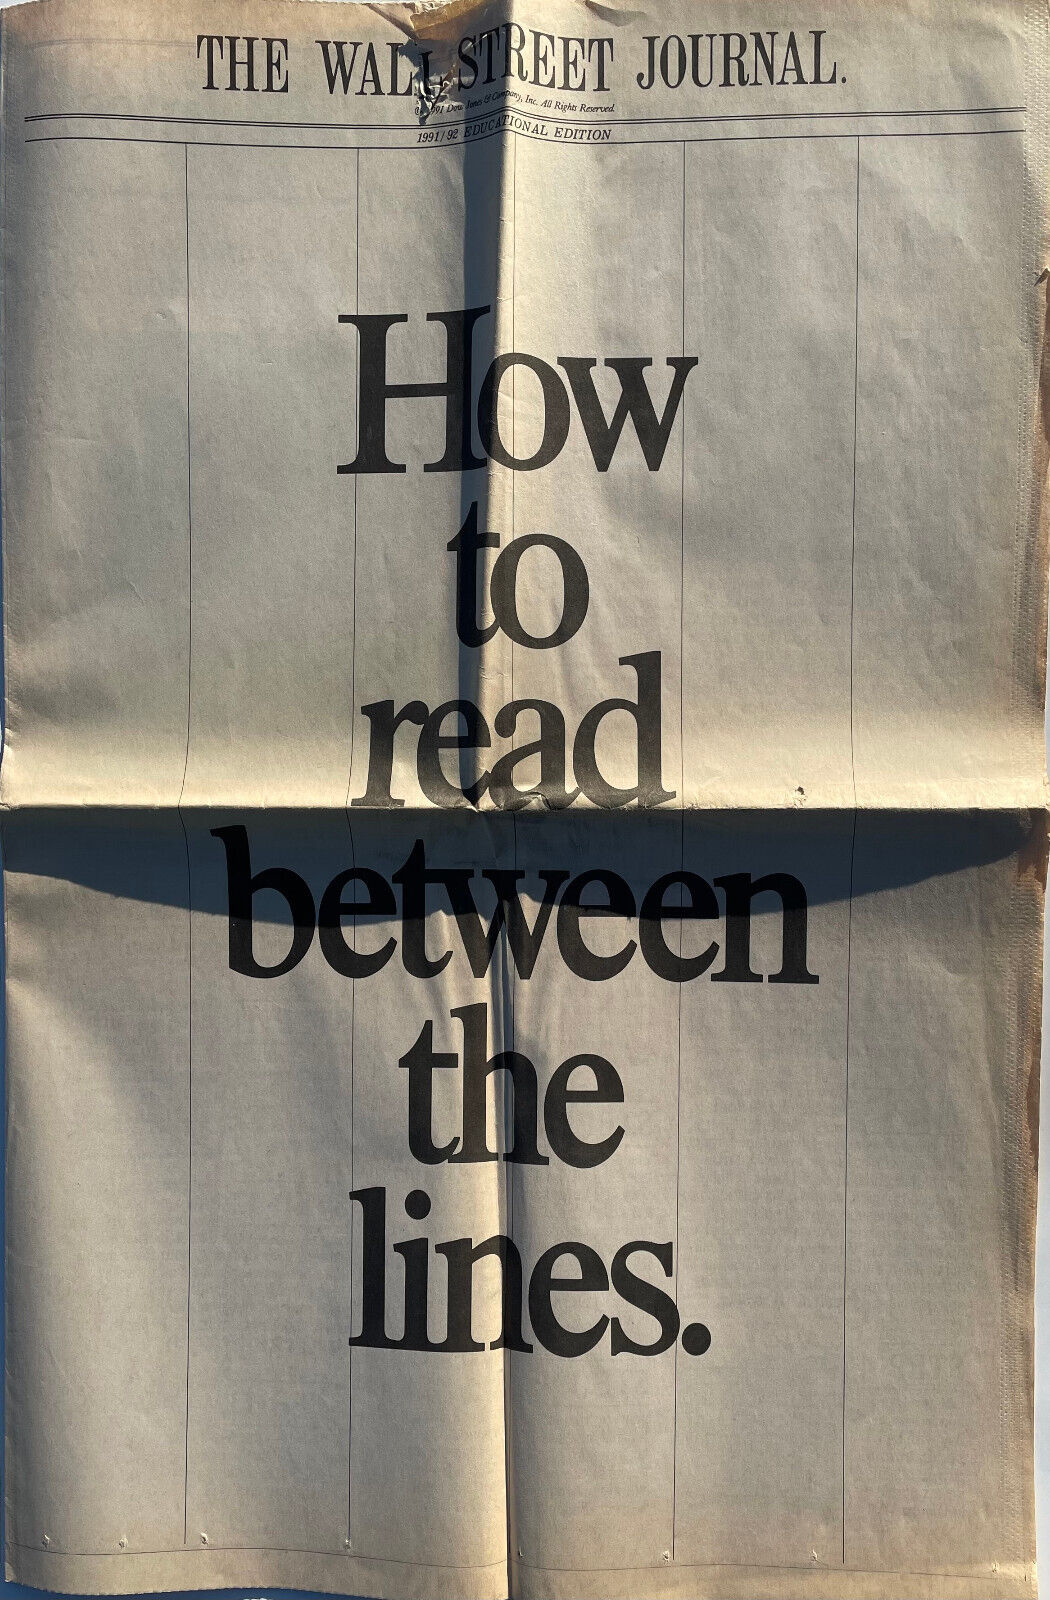 Wall Street Journal 1991/92 Educational Edition How To Read Between The Lines